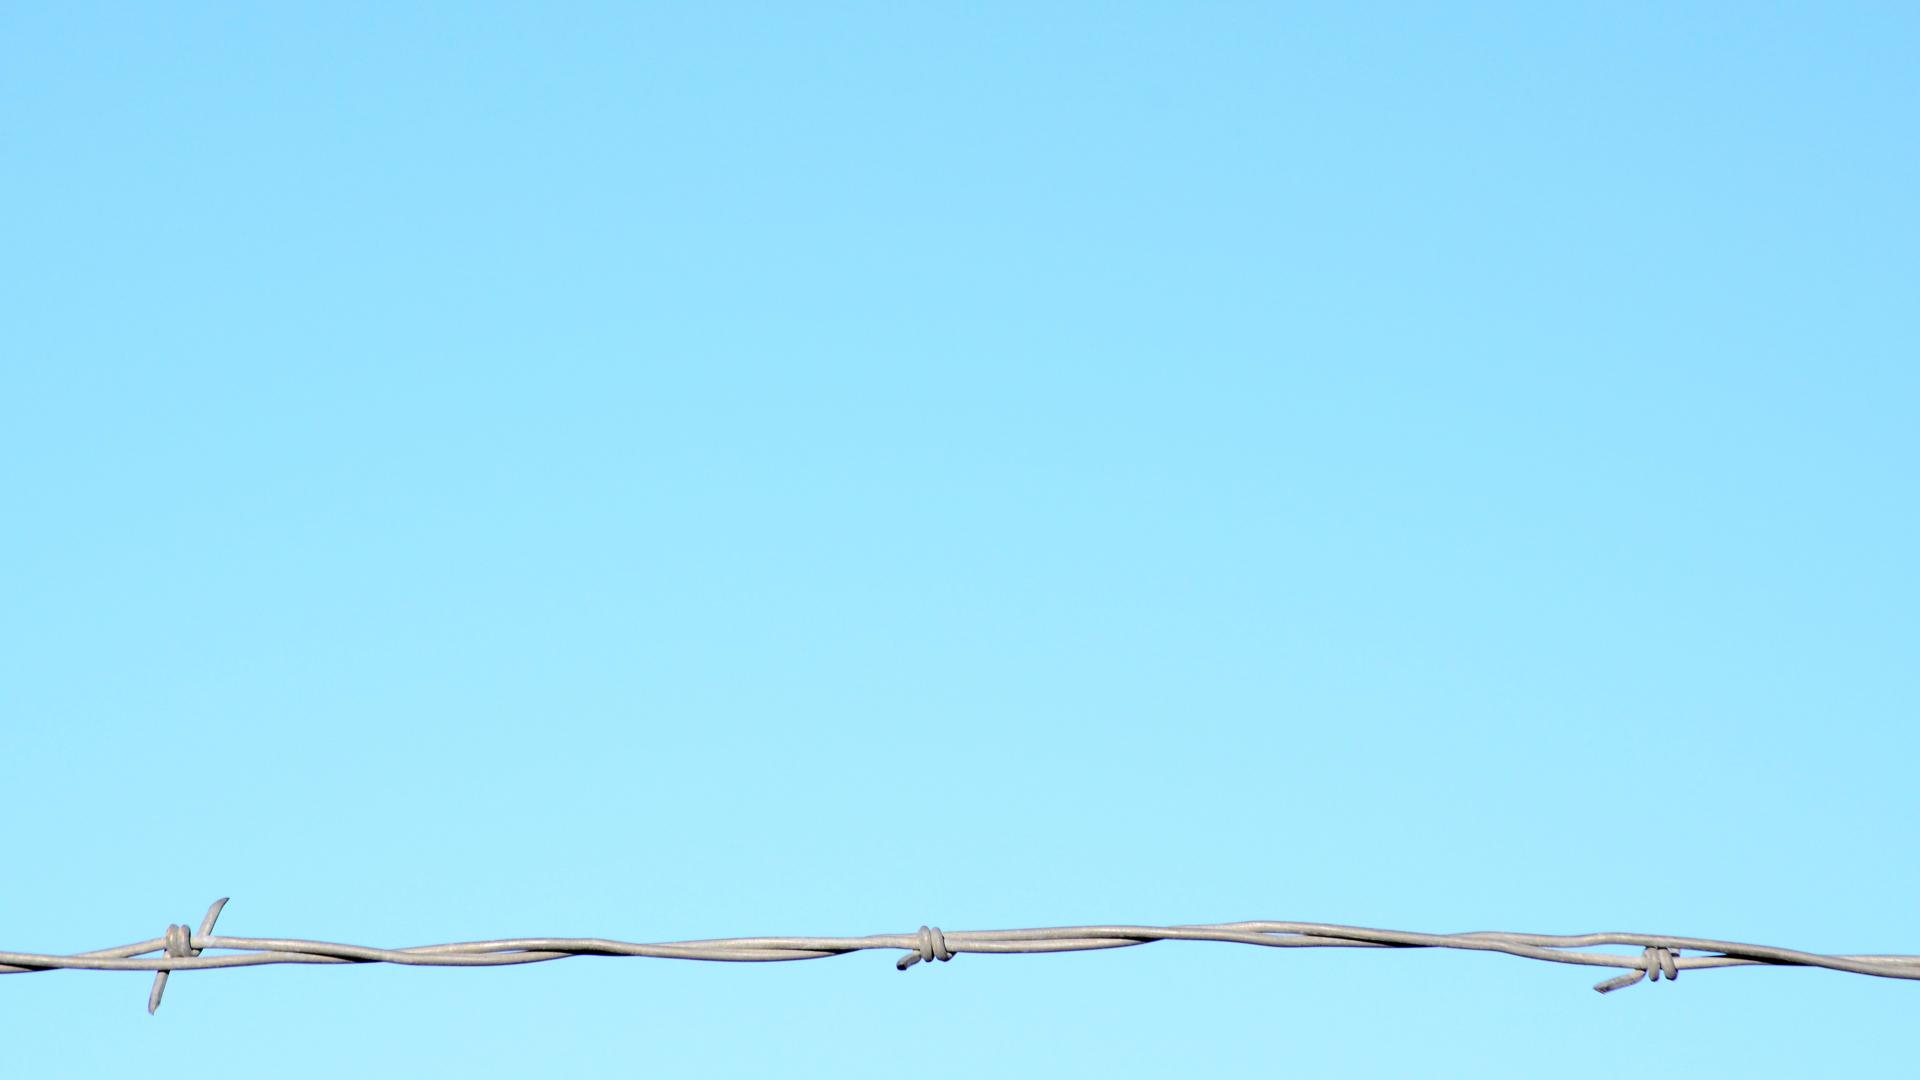 Single line of barbed wire against clear blue sky background